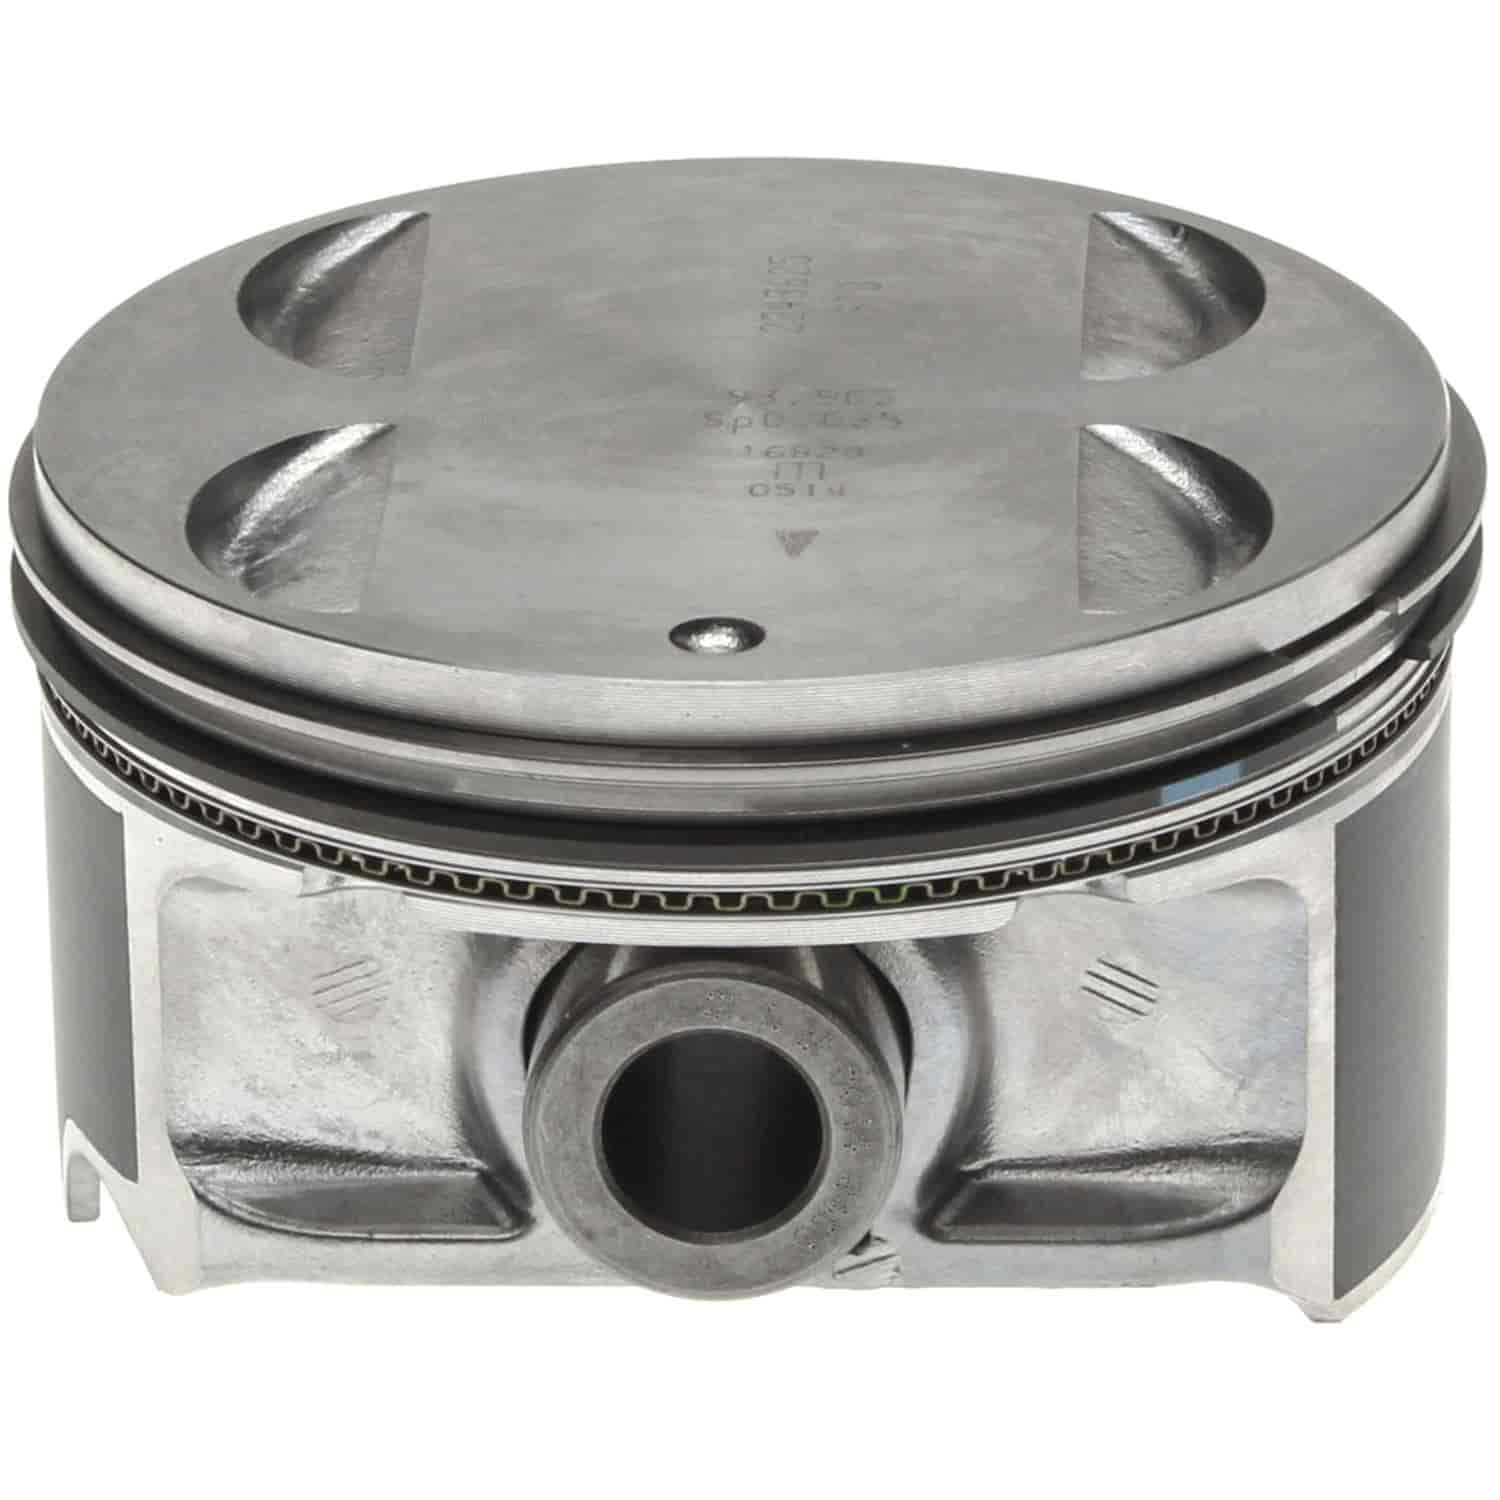 Piston and Rings Set 2004-2012 GM High Feature V6 3.6L with 94mm Bore (Standard)